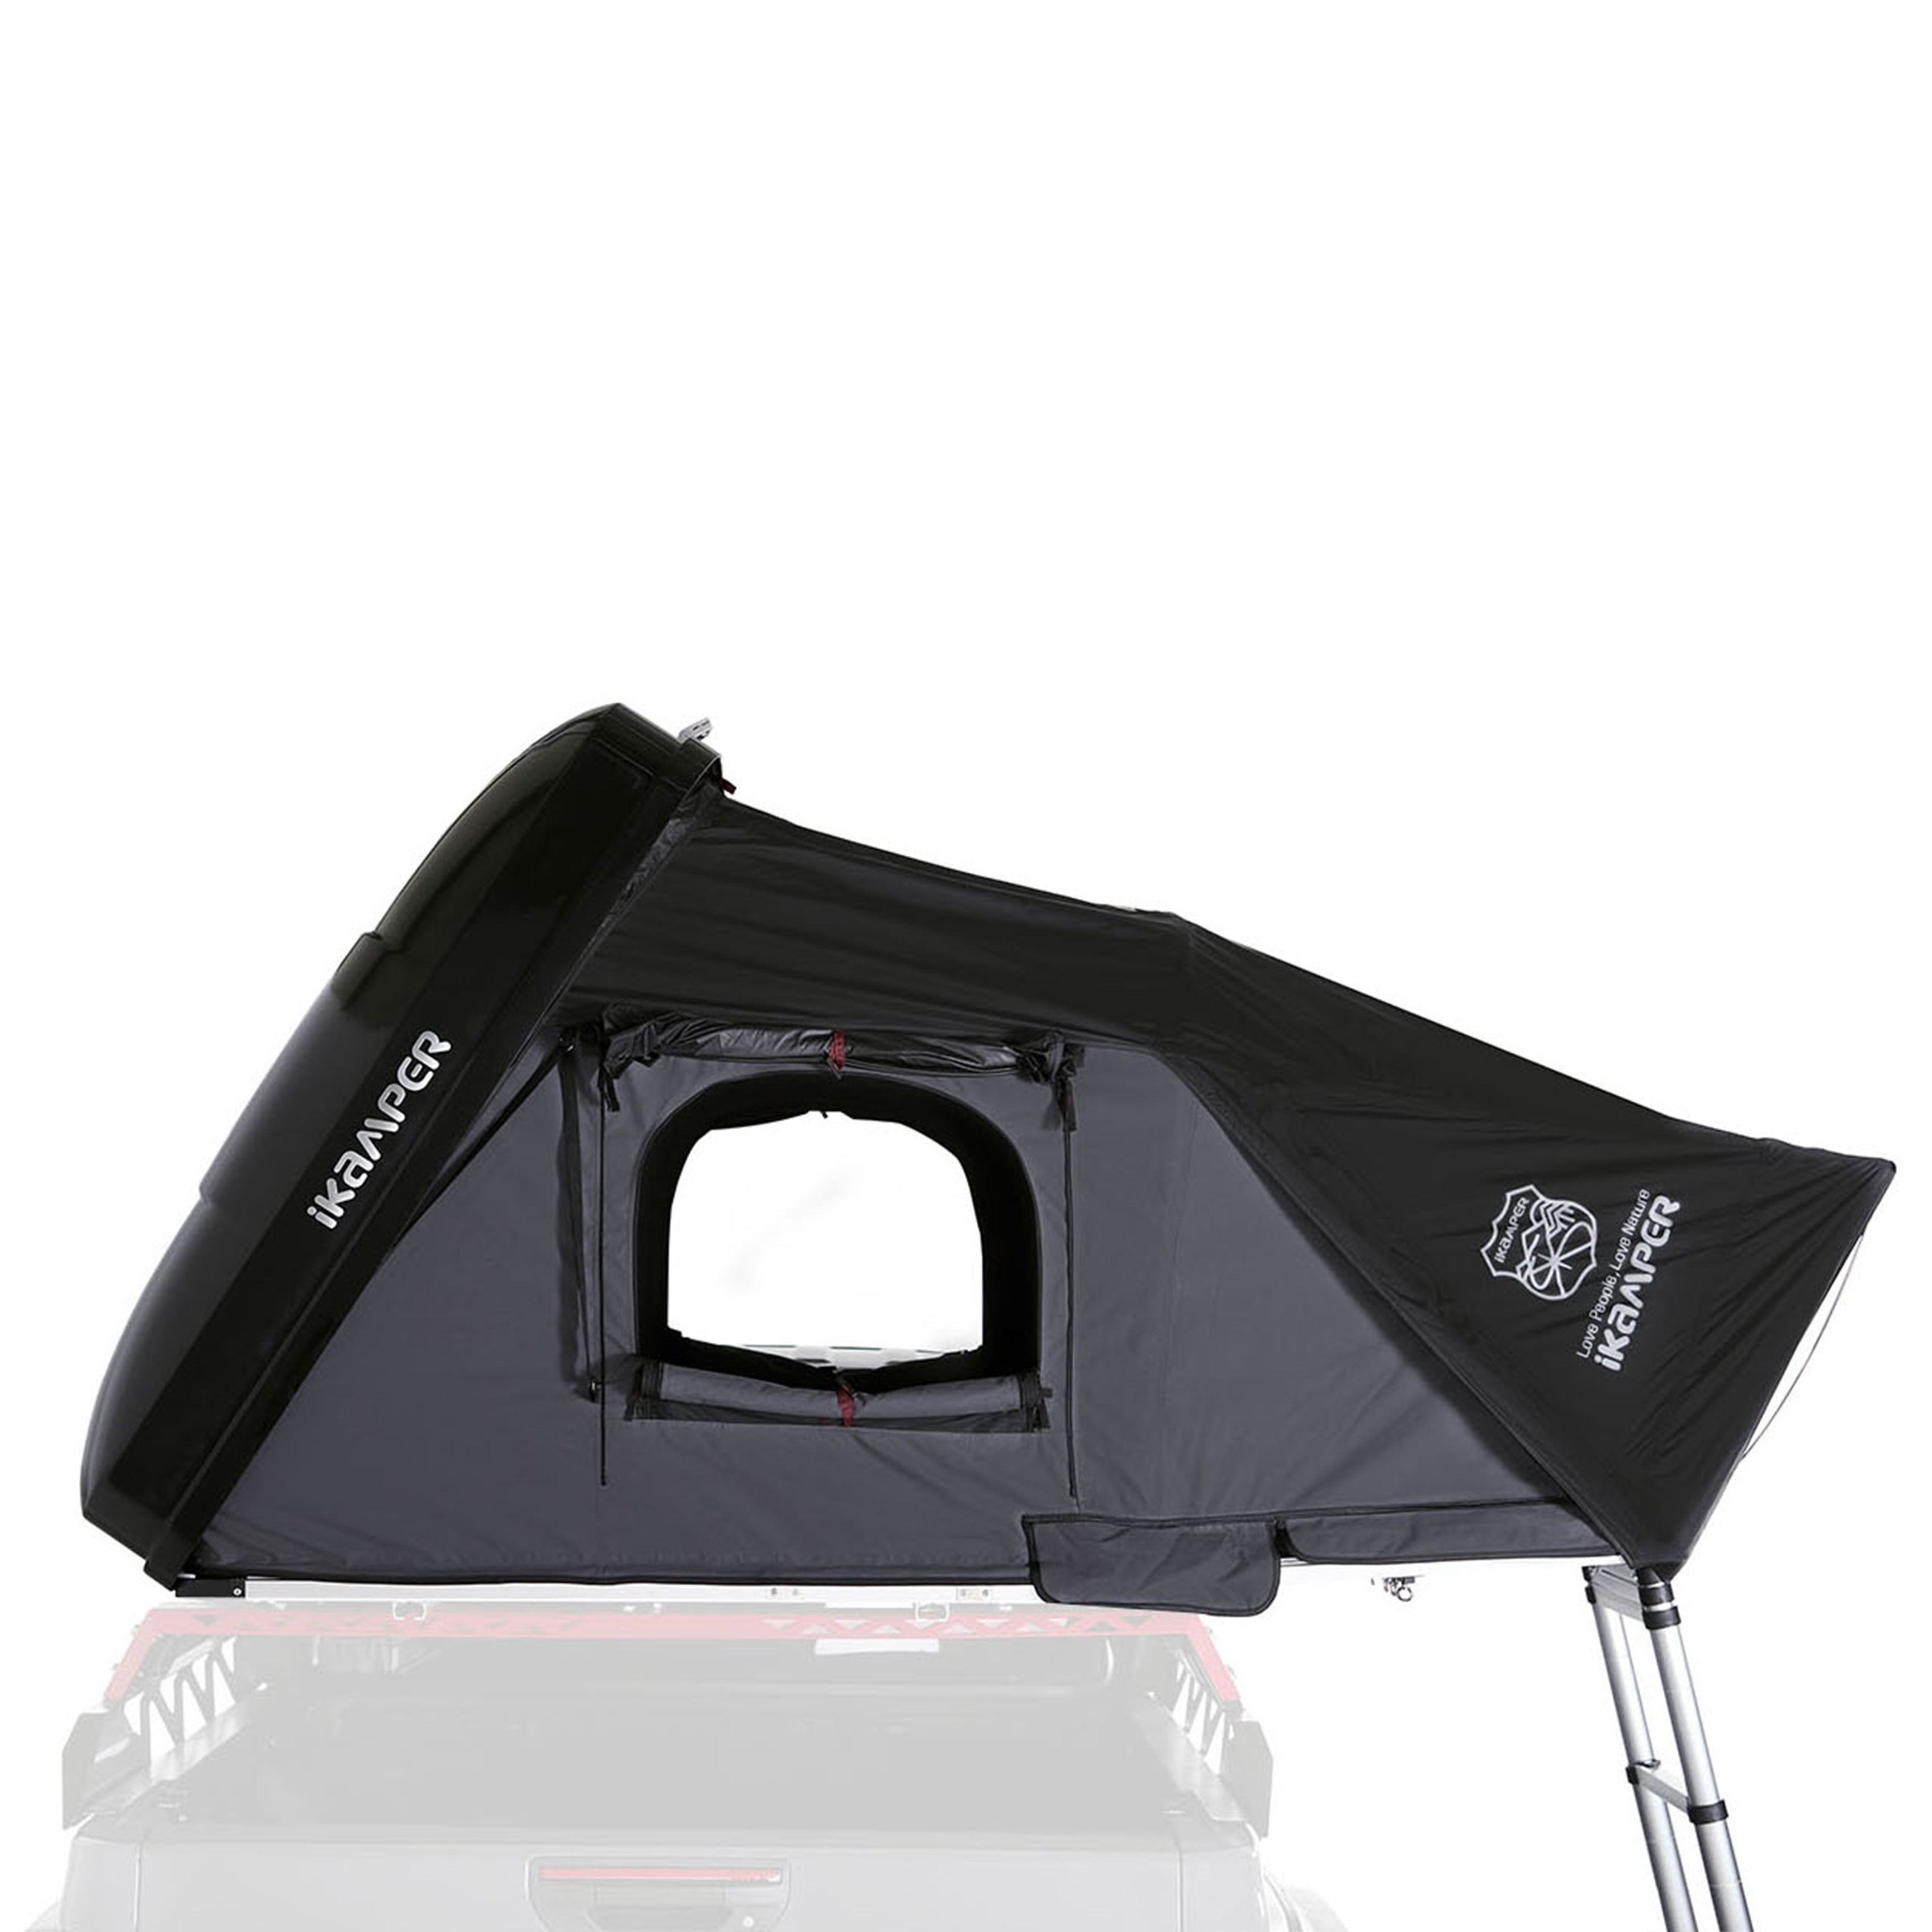 Skycamp Mini 3.0 | Two Person Roof Top Tent for Small Vehicles